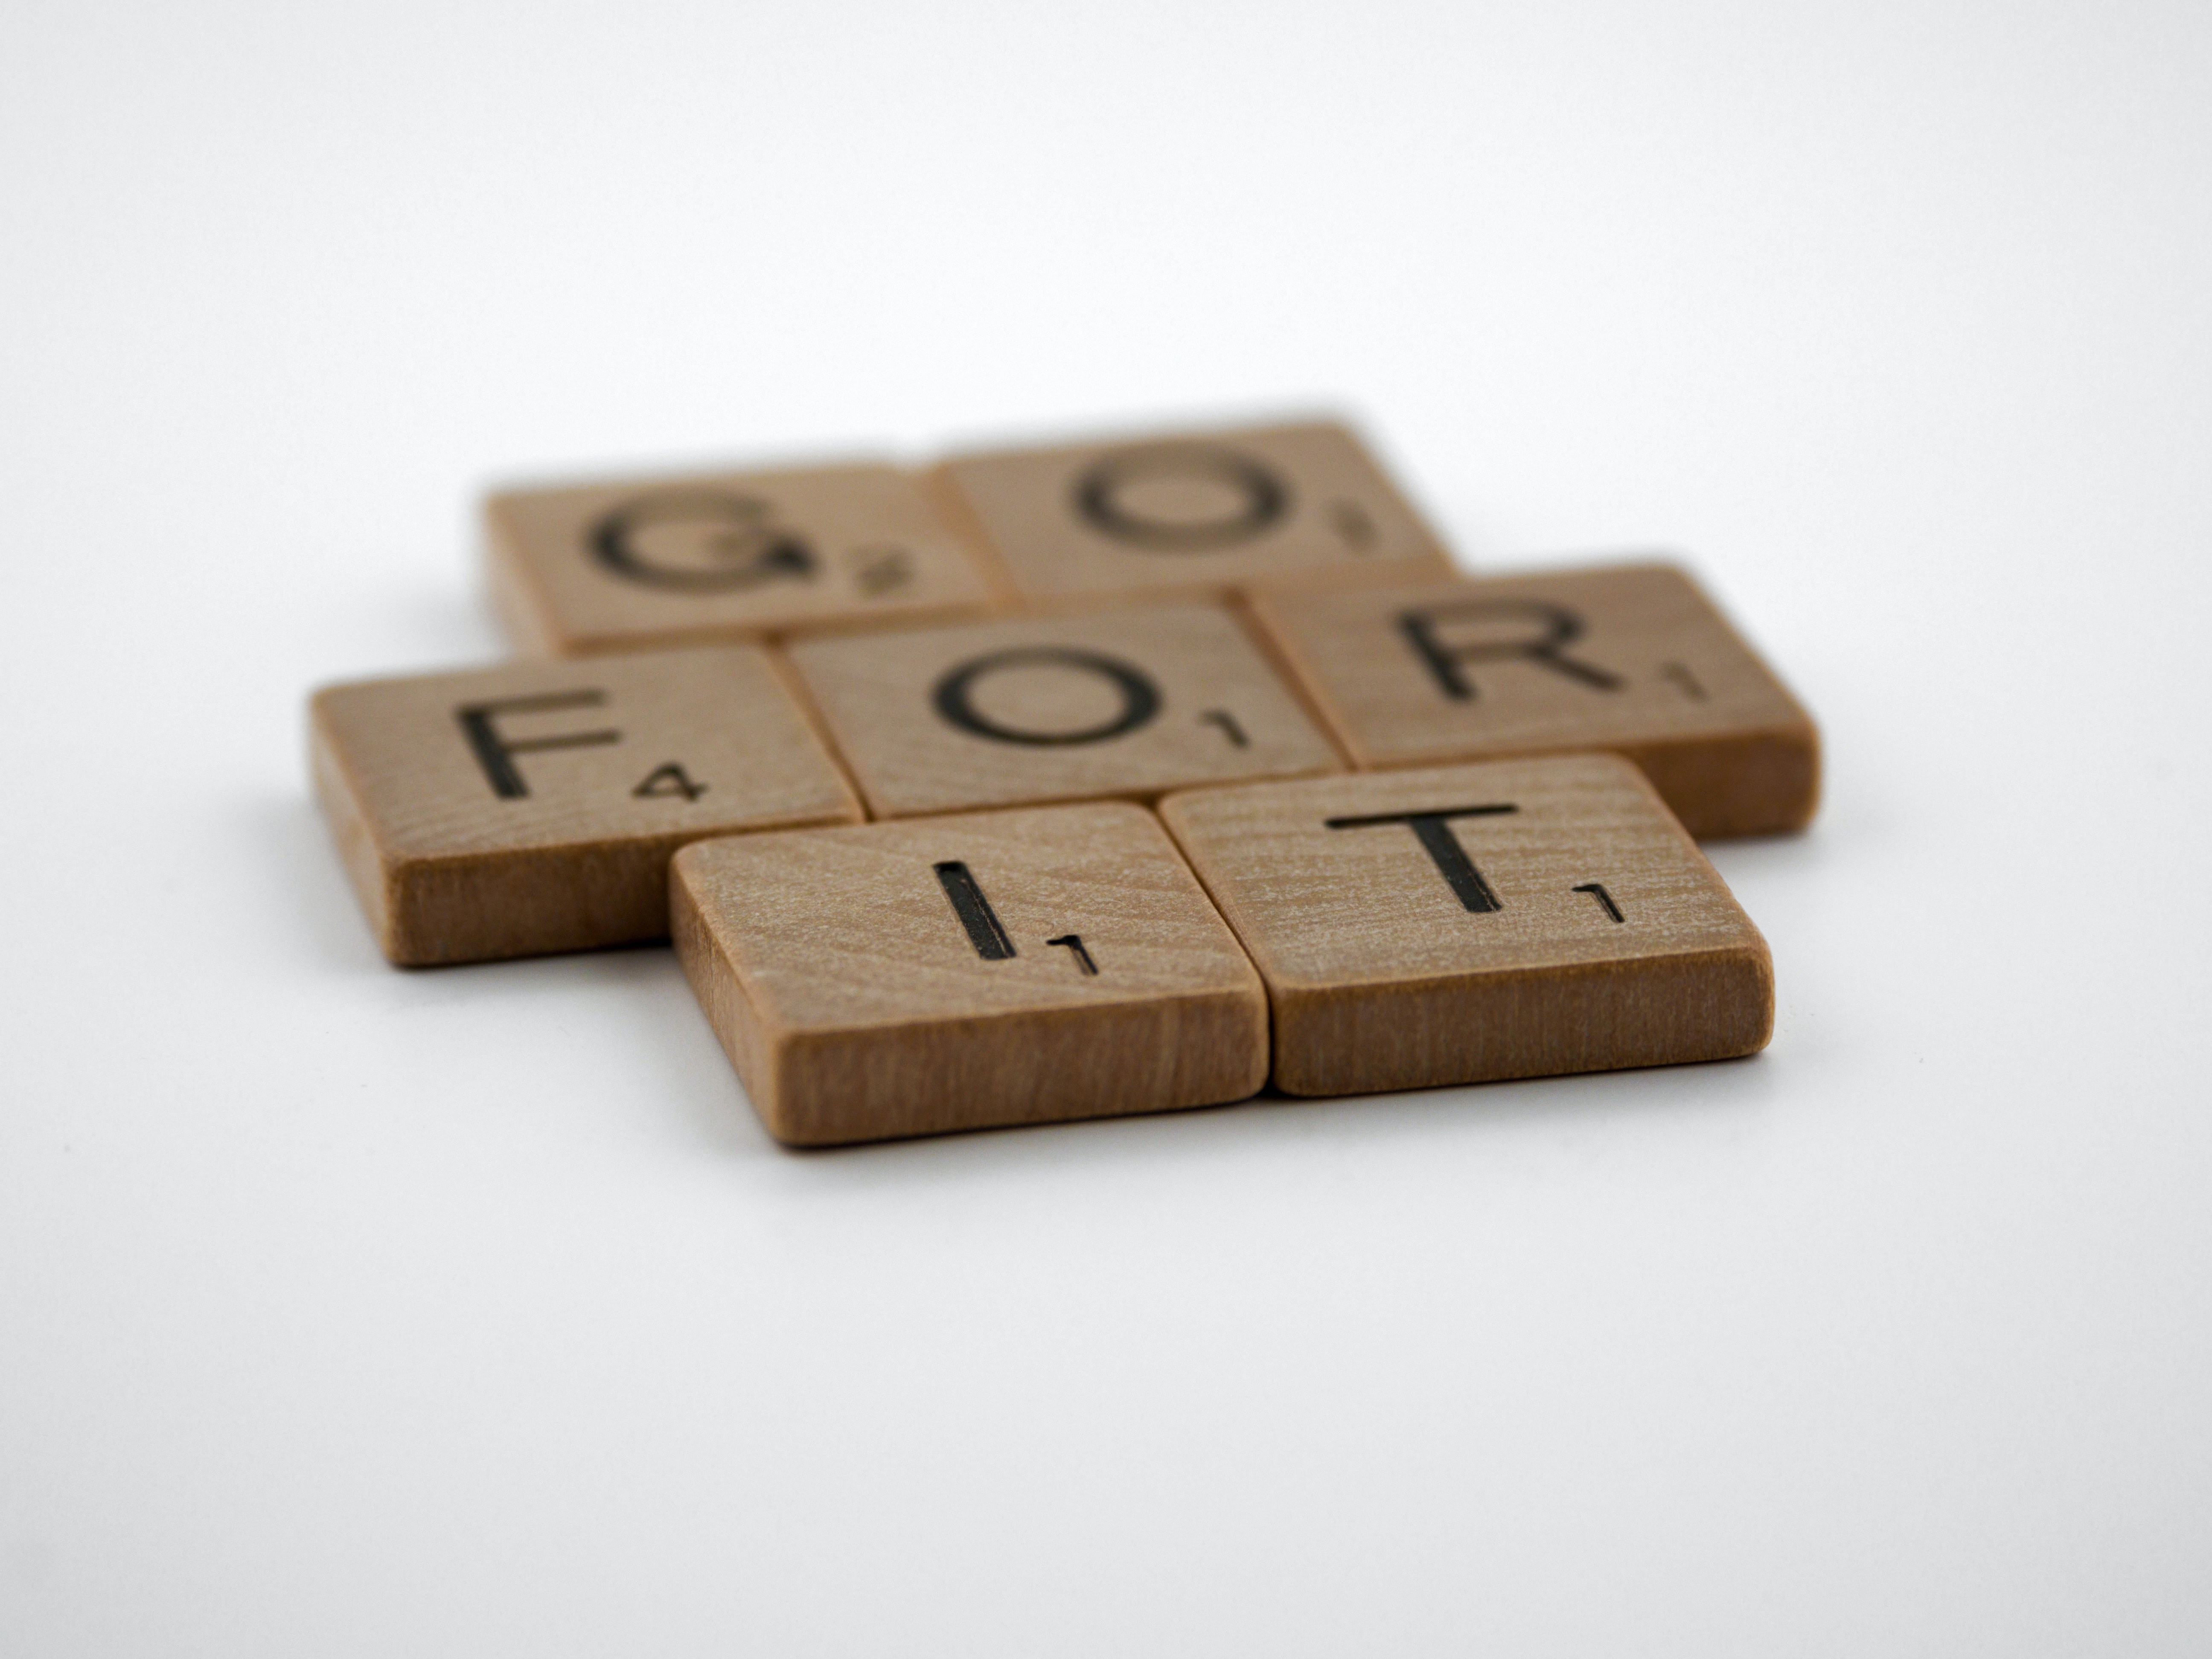 Scrabble pieces that spell "Go for it."